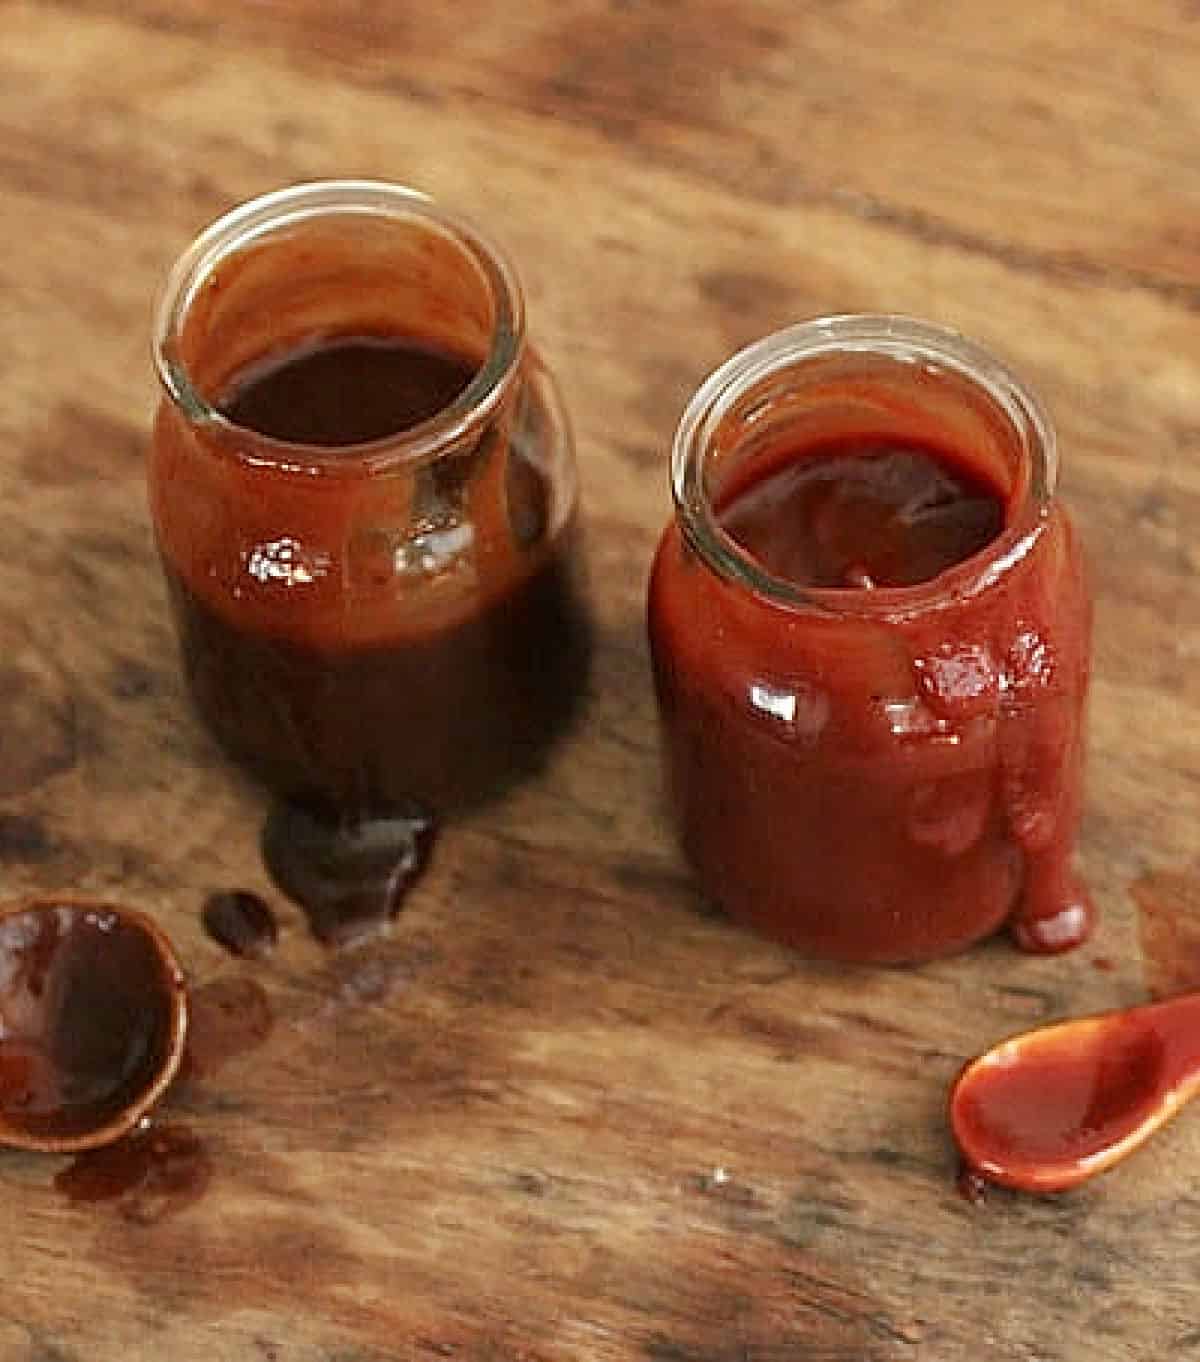 Brown and red barbecue sauces in jars on a wooden surface with spoons.